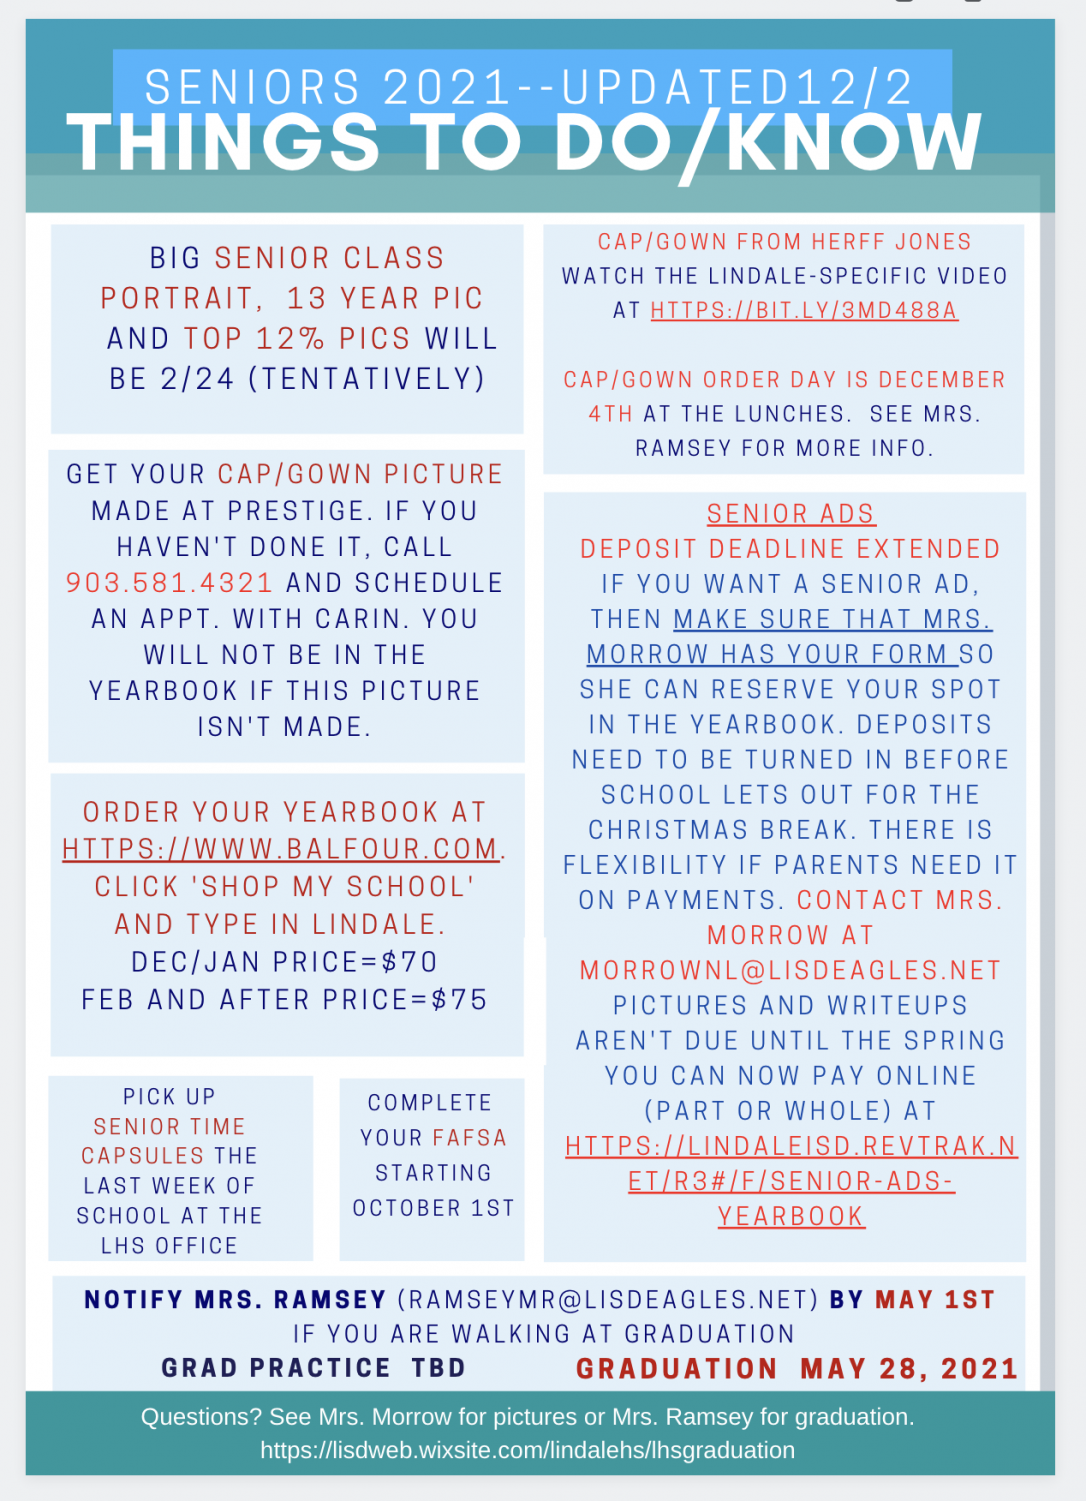 Updated Senior Things to To Do/Know Information as of 12/2/2020